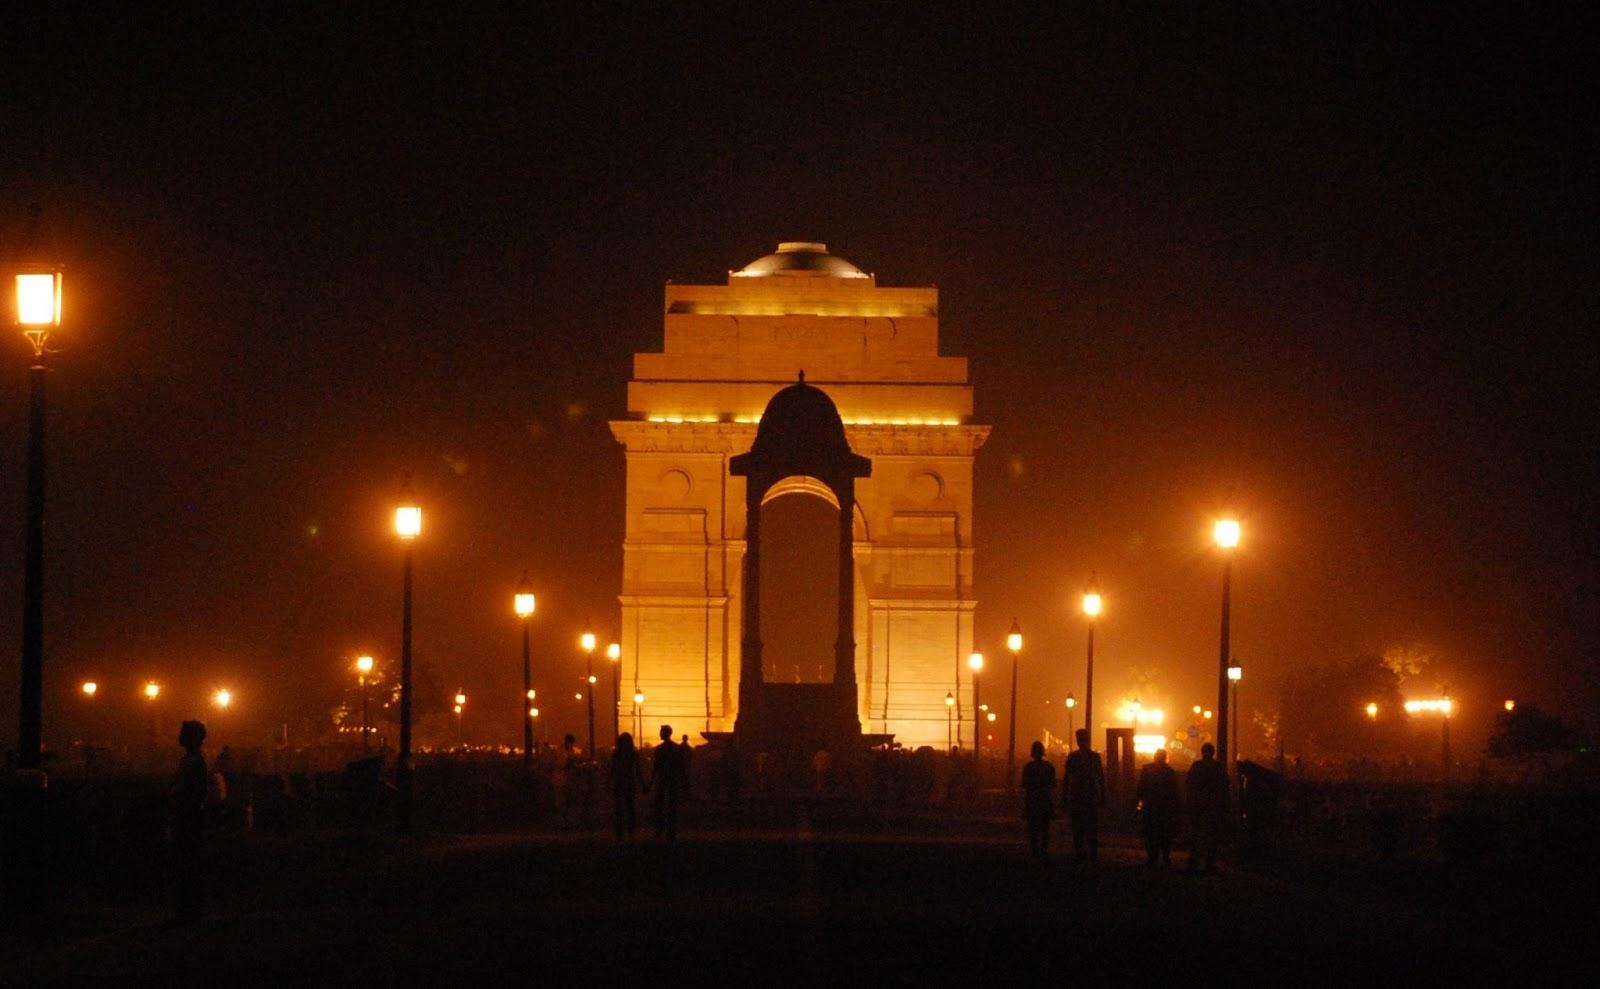 Of india gate HD wallpapers  Pxfuel